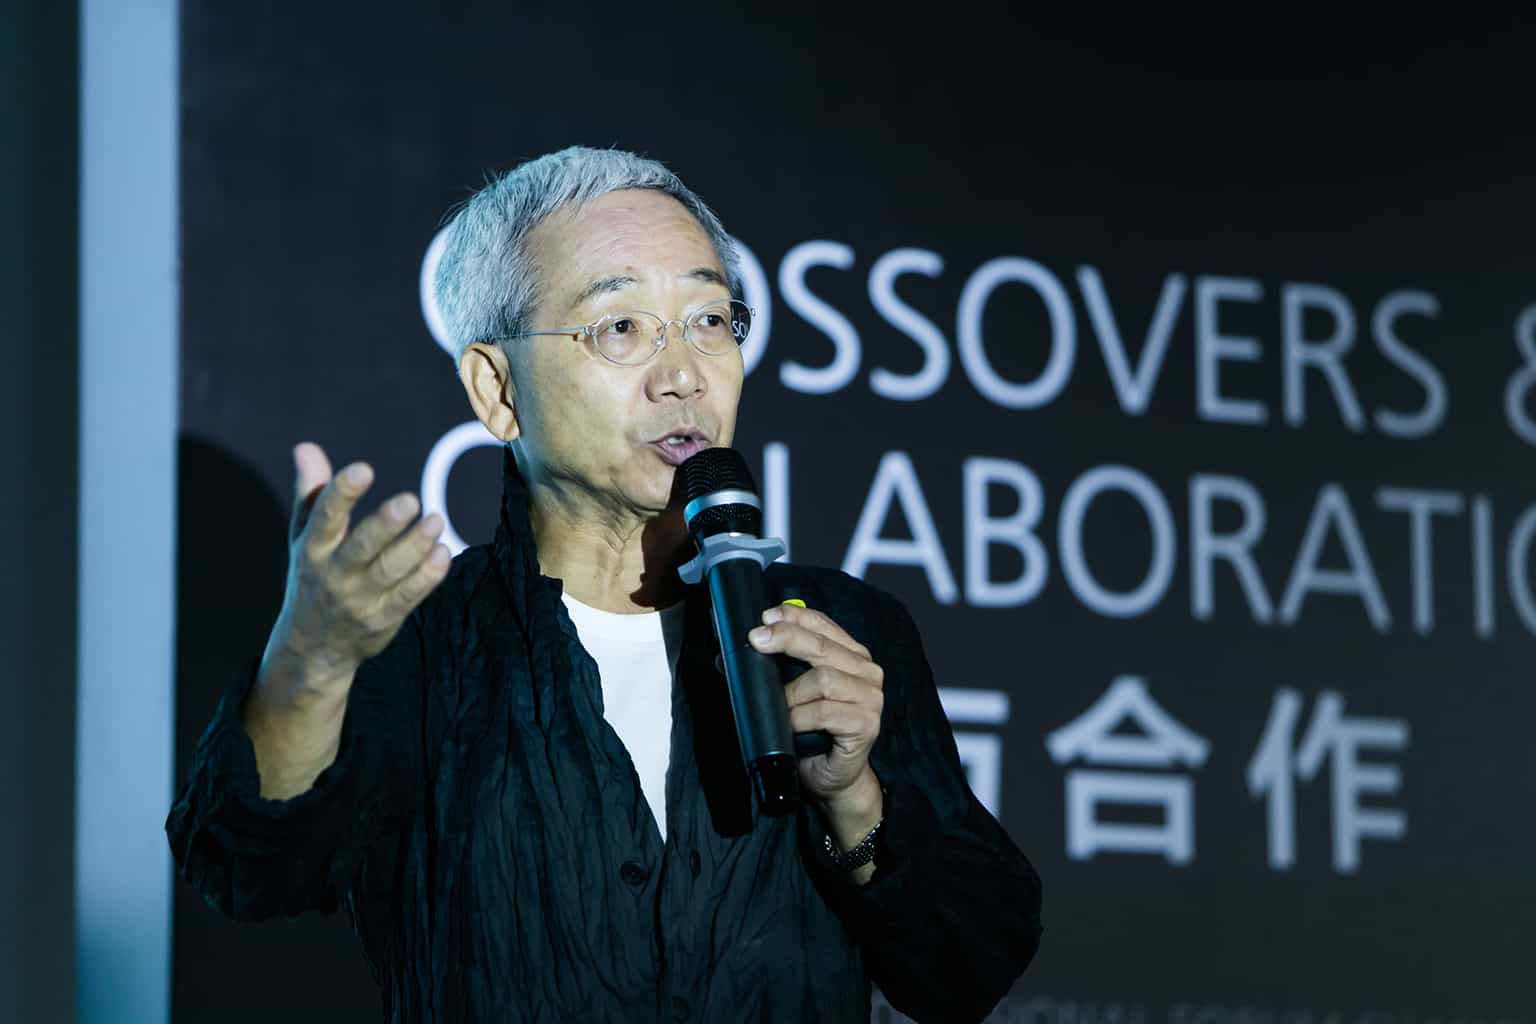 Lecture in Shanghai